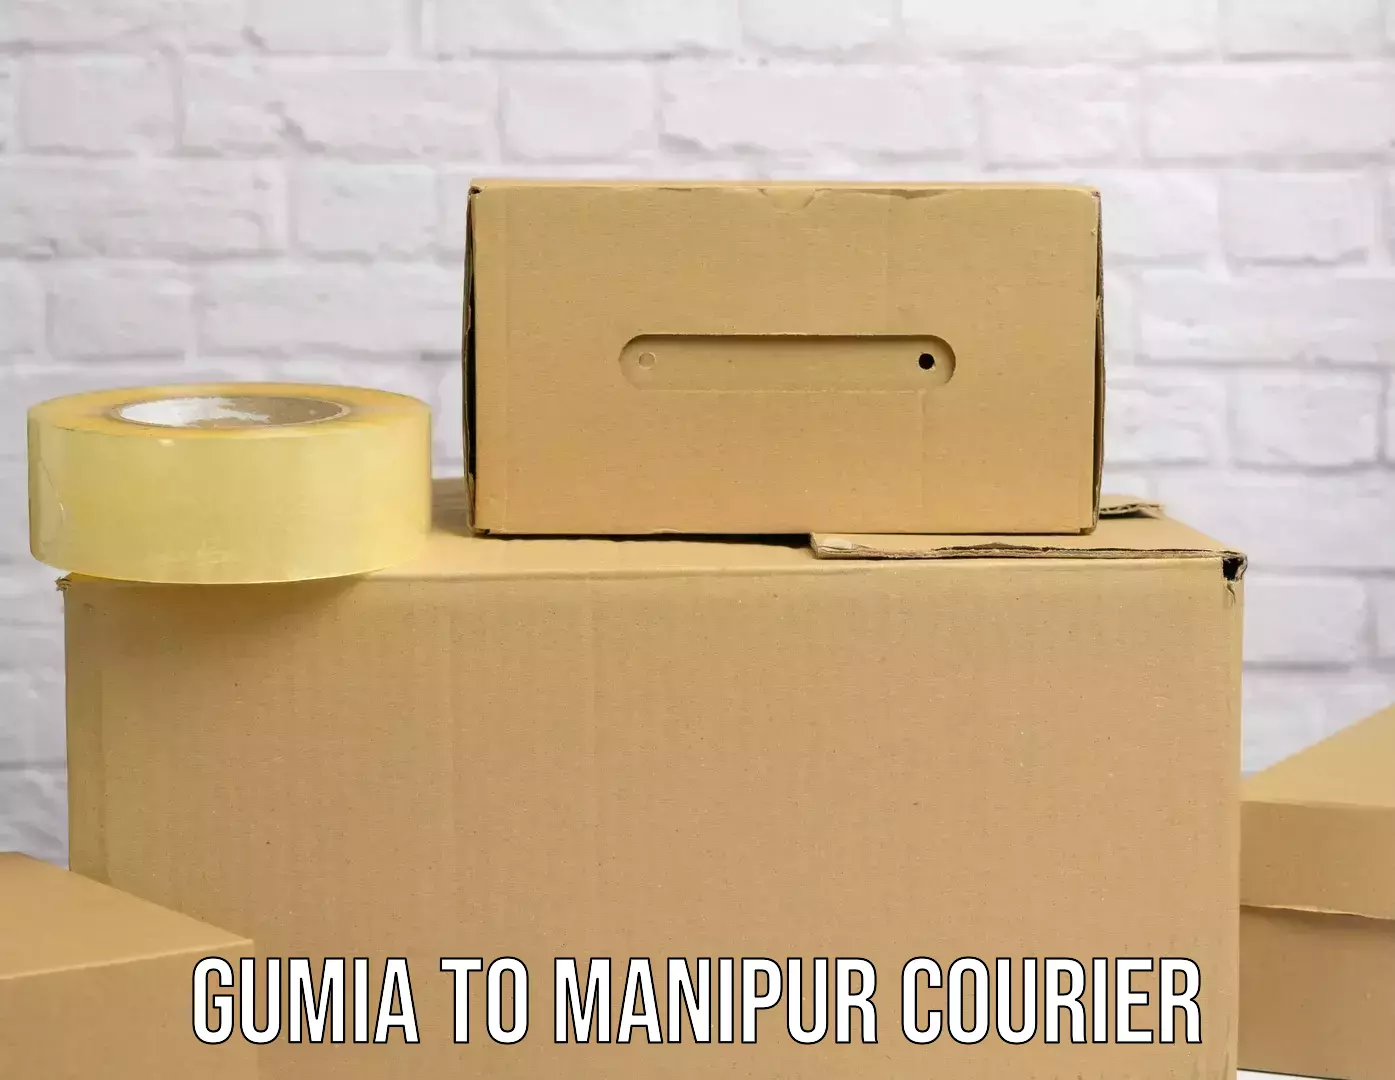 End-to-end delivery Gumia to Manipur